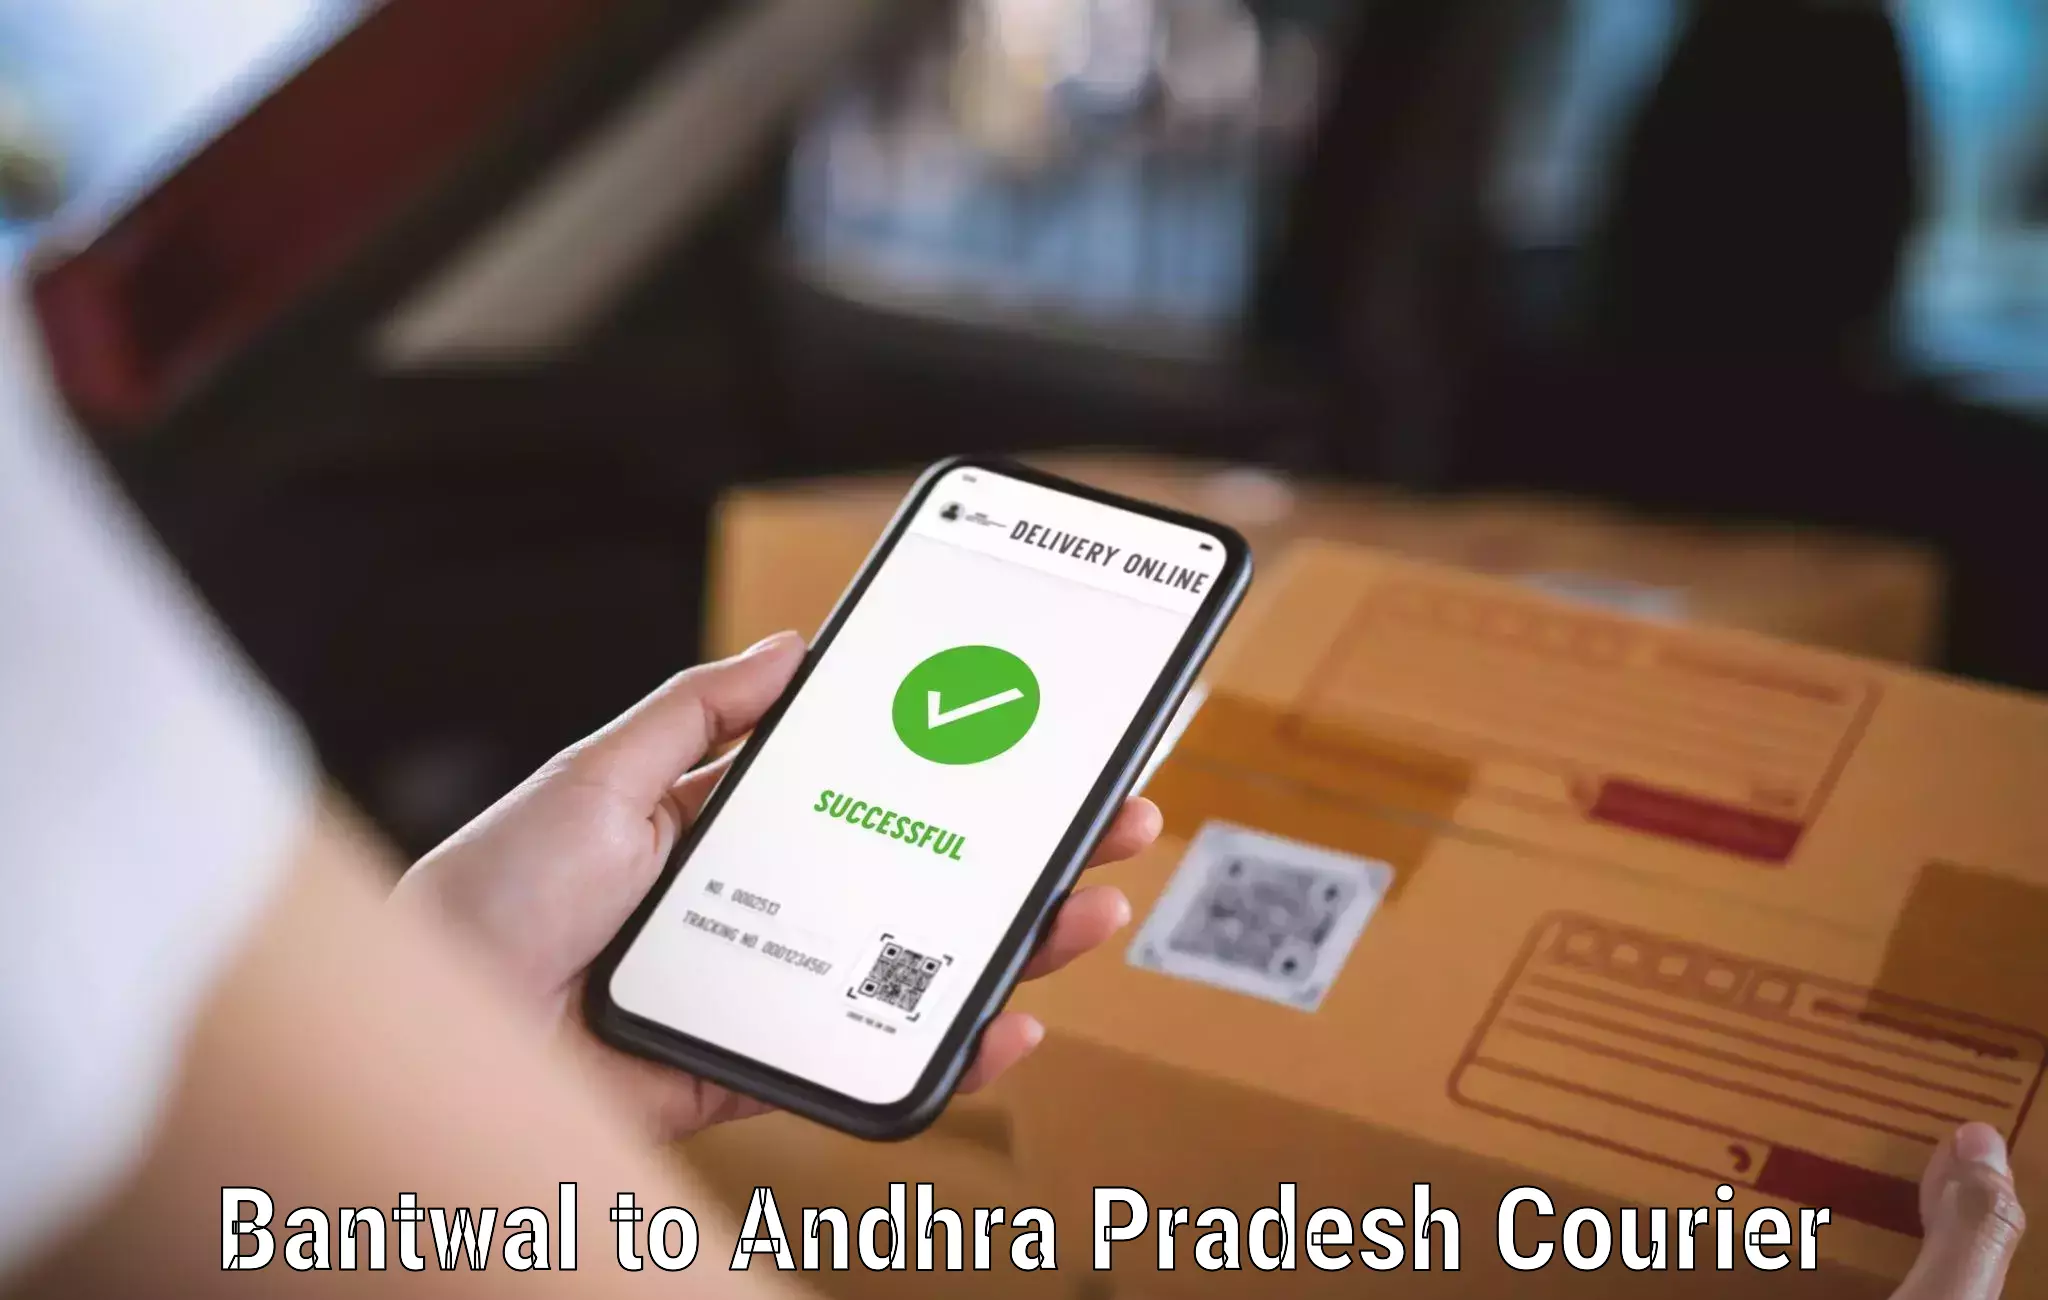 User-friendly courier app Bantwal to Andhra Pradesh